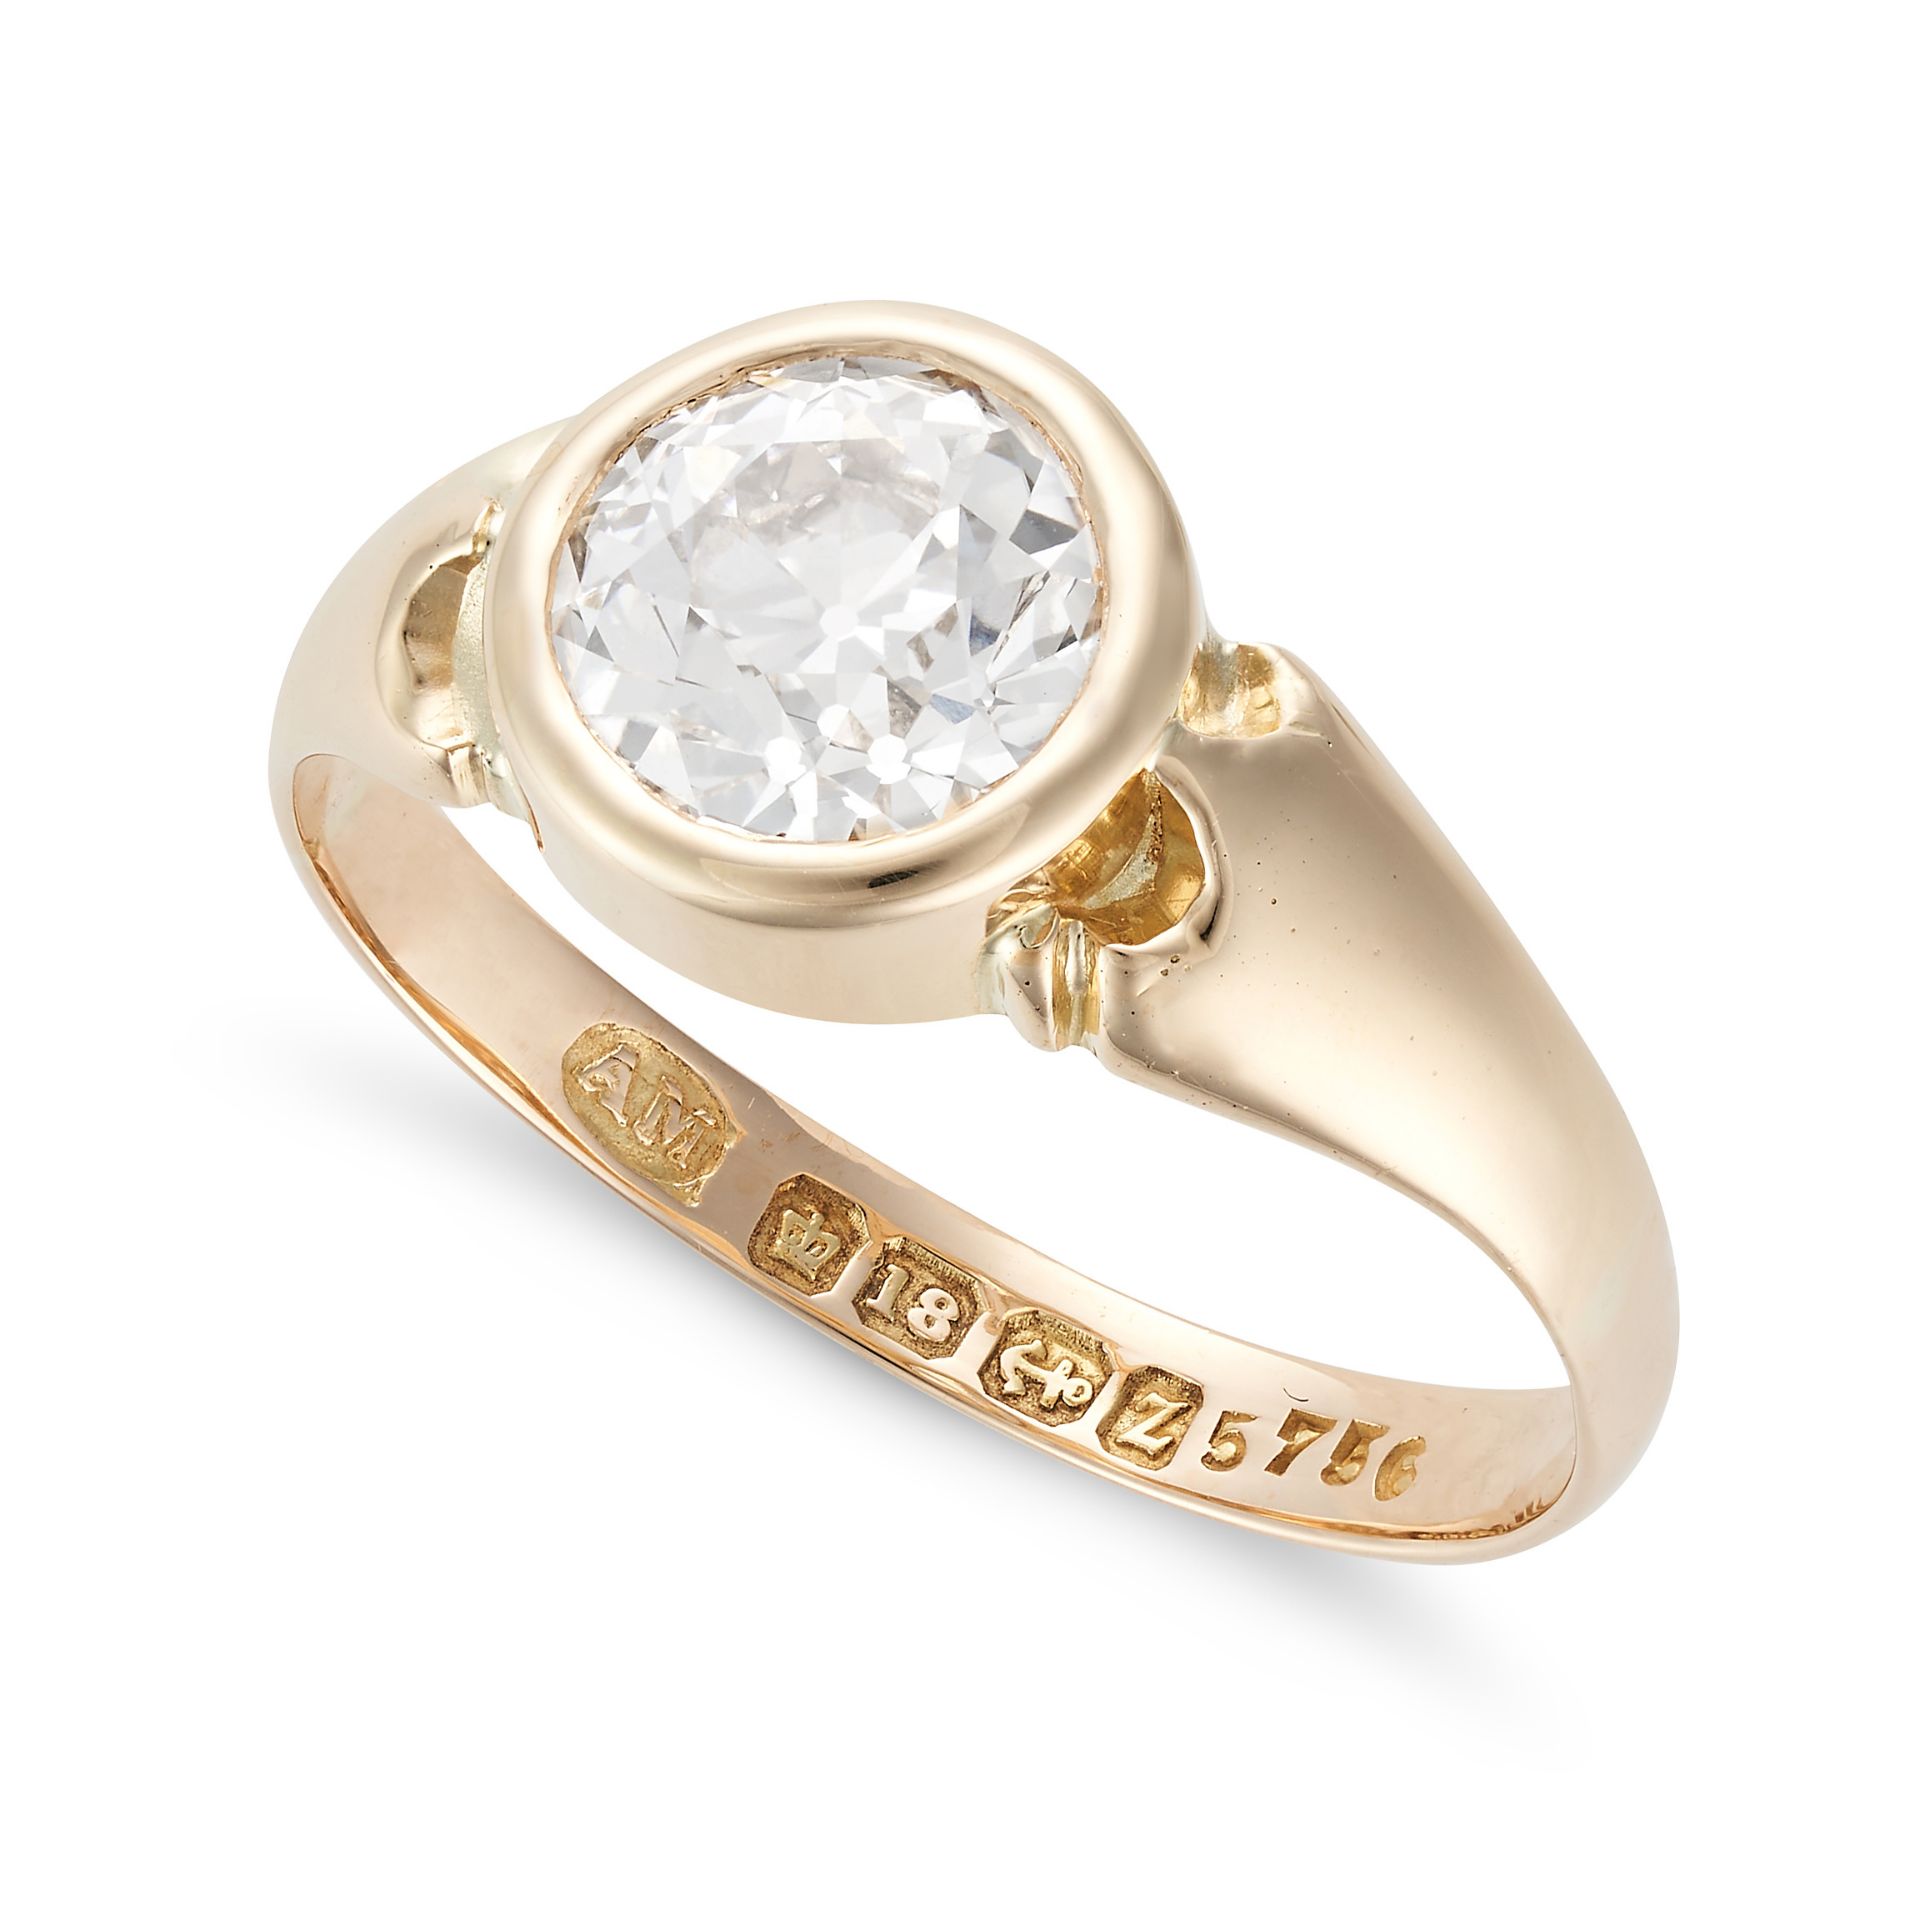 AN ANTIQUE SOLITAIRE DIAMOND RING in 18ct yellow gold, set with an old European cut diamond of ap... - Image 2 of 3